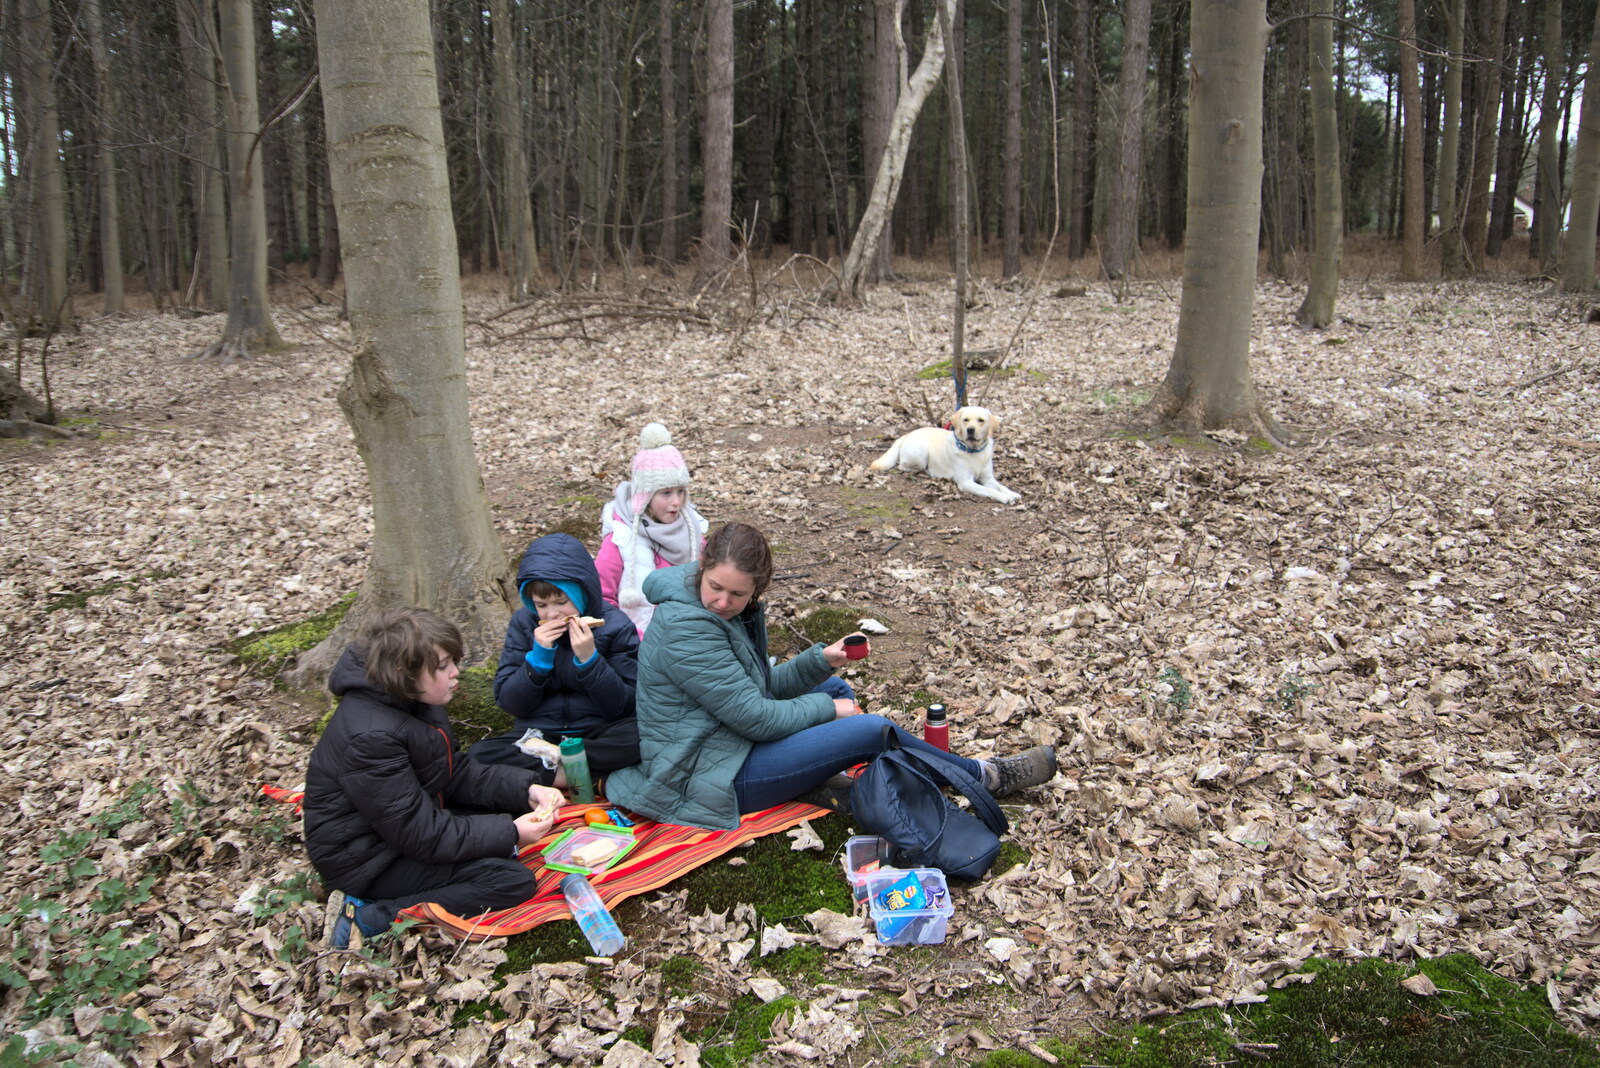 We stop for a picnic in the woods from A Trip to Dunwich Beach, Dunwich, Suffolk - 2nd April 2021